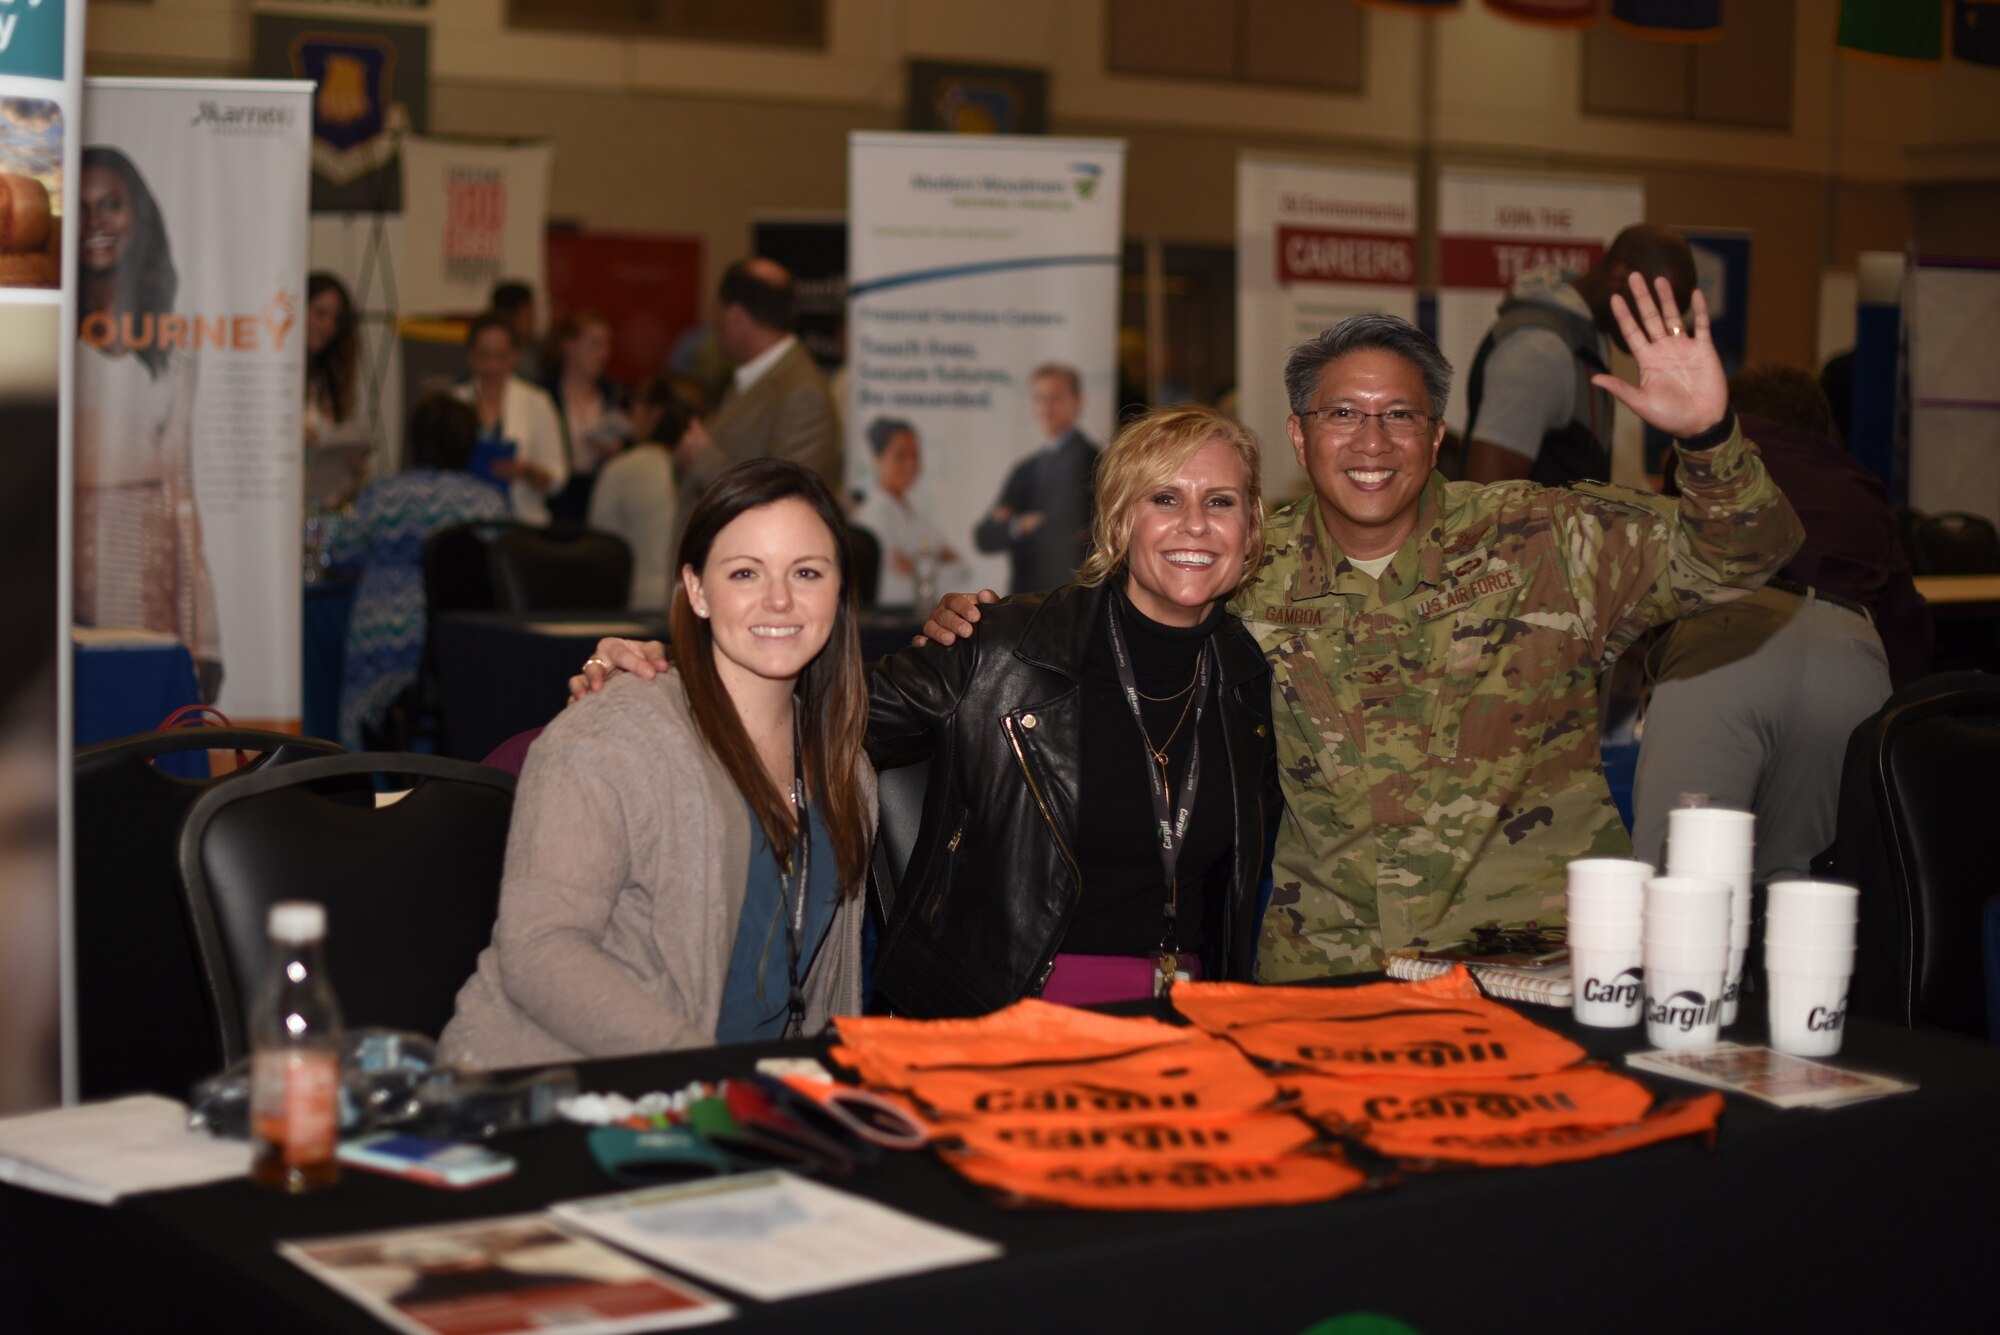 Col. Anthony Gamboa, 22nd Mission Support Group commander, poses with Alisa Brown, Cargill senior employee experience specialist and Paige Baldwin, Cargill employee relations specialist for a photo at the job fair March 20, 2019 at McConnell Air Force Base, Kan. Cargill was one of 70 employers to attend to the 2019 Job Fair hosted by McConnell. (U.S. Air Force photo by Airman 1st Class Alexi Myrick)